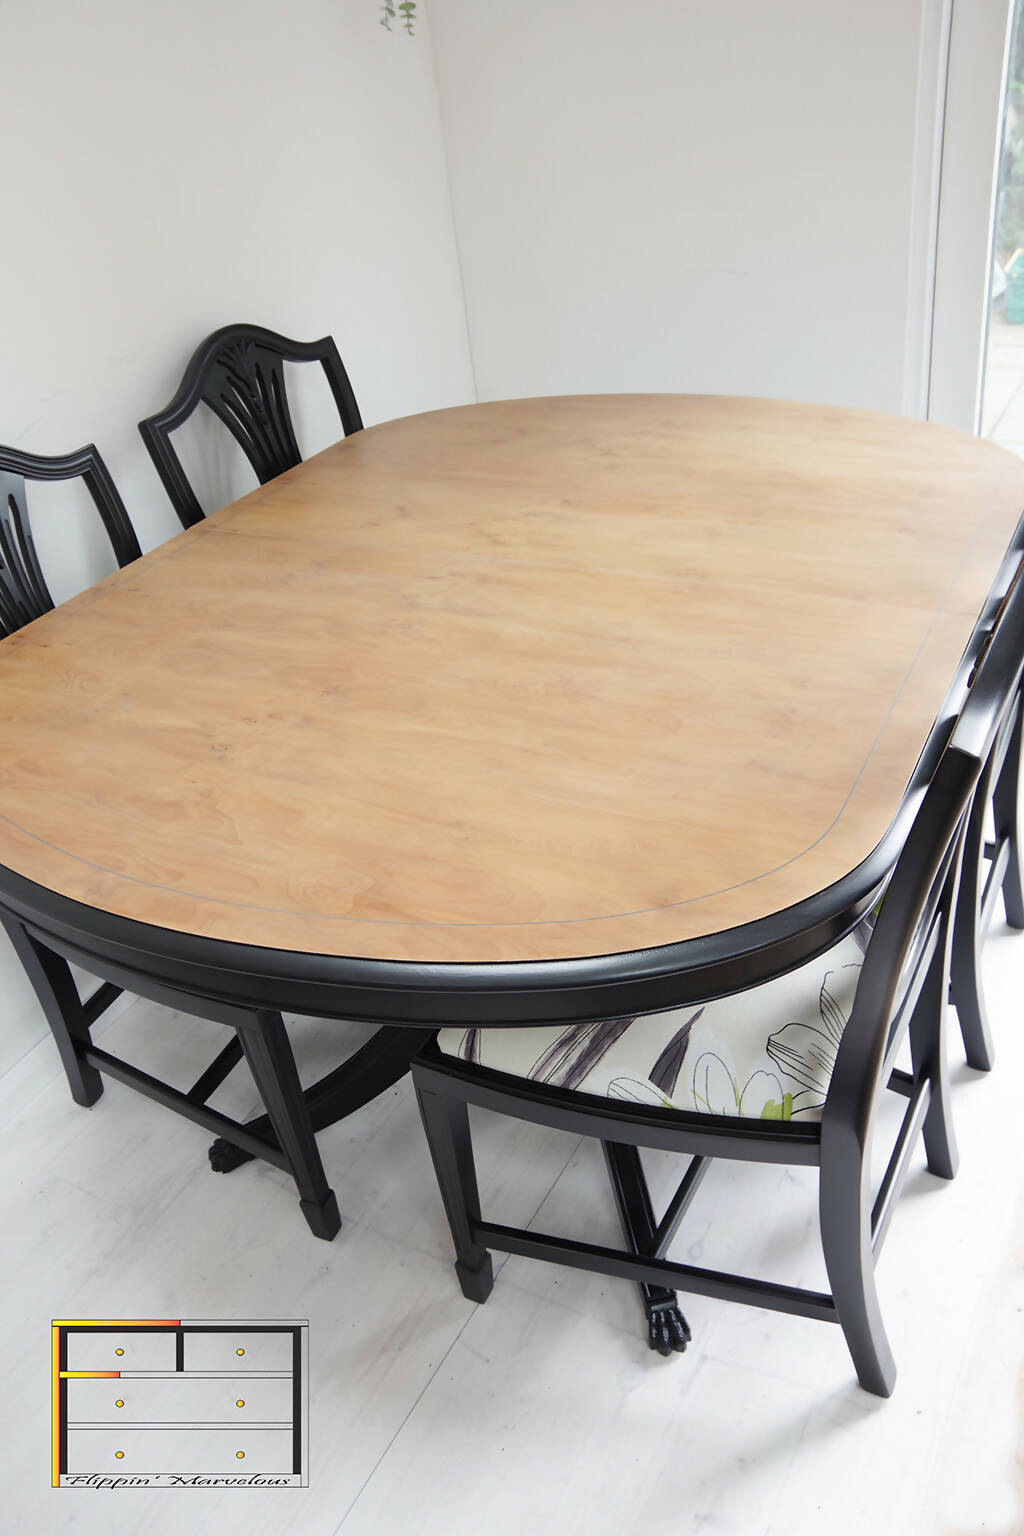 Vintage Bradley Dining Table and 4 Chairs, Black Yew Table and Four Wheatear Style Chairs. Extending Dining Set Bill Beaumont Floral Seats